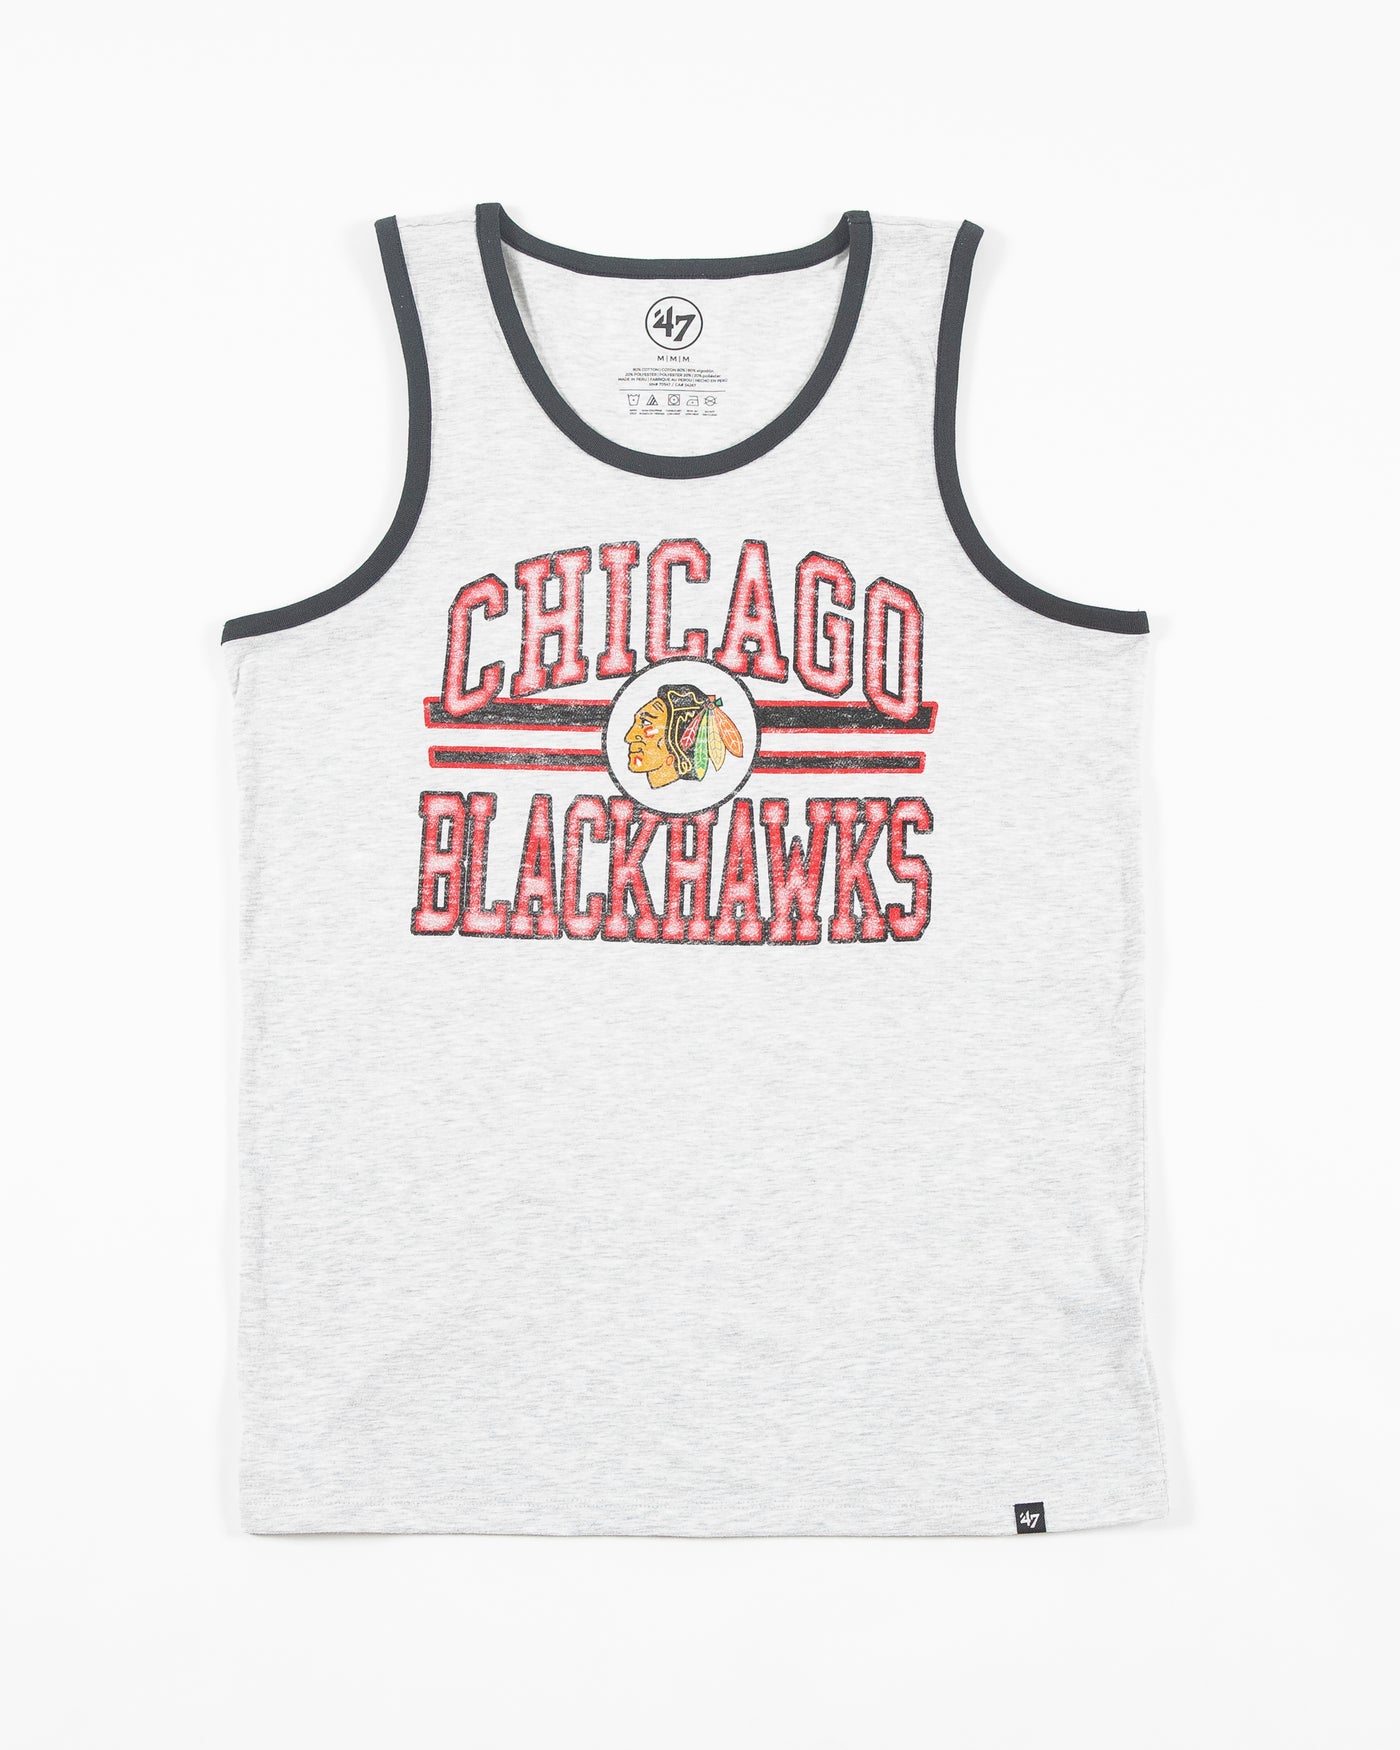 '47 brand grey tank with Chicago Blackhawks distressed vintage graphic across front and contrasting color trim - front lay flat